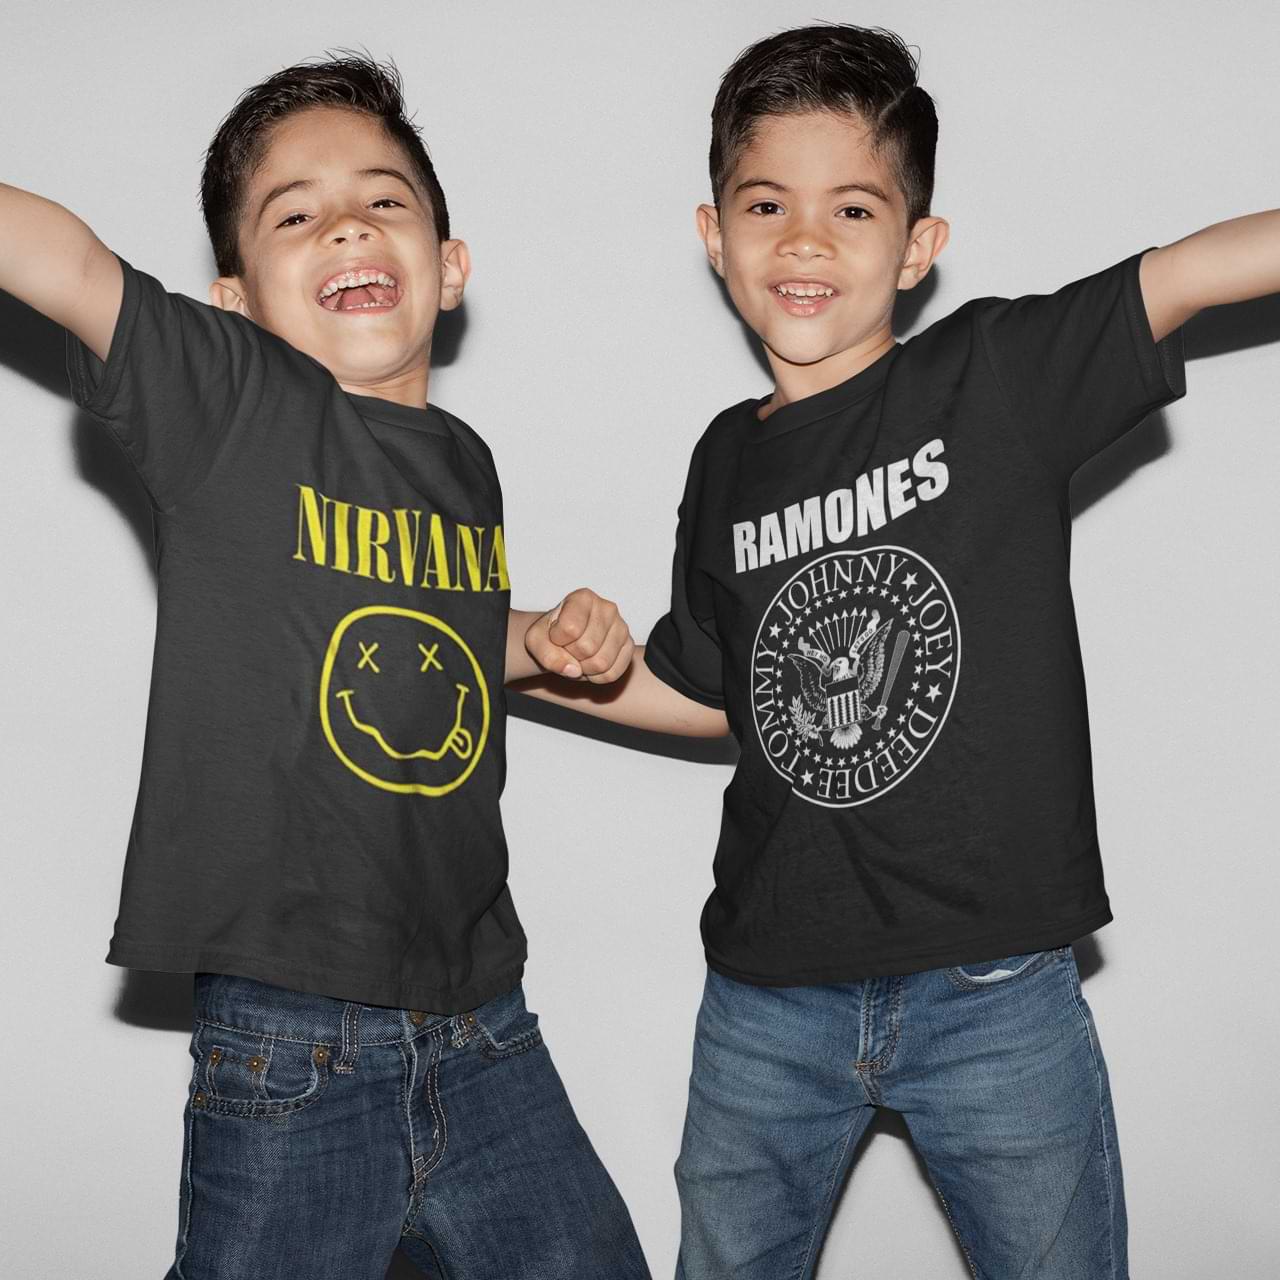 10 Band T-Shirts That Every Kid Will Love